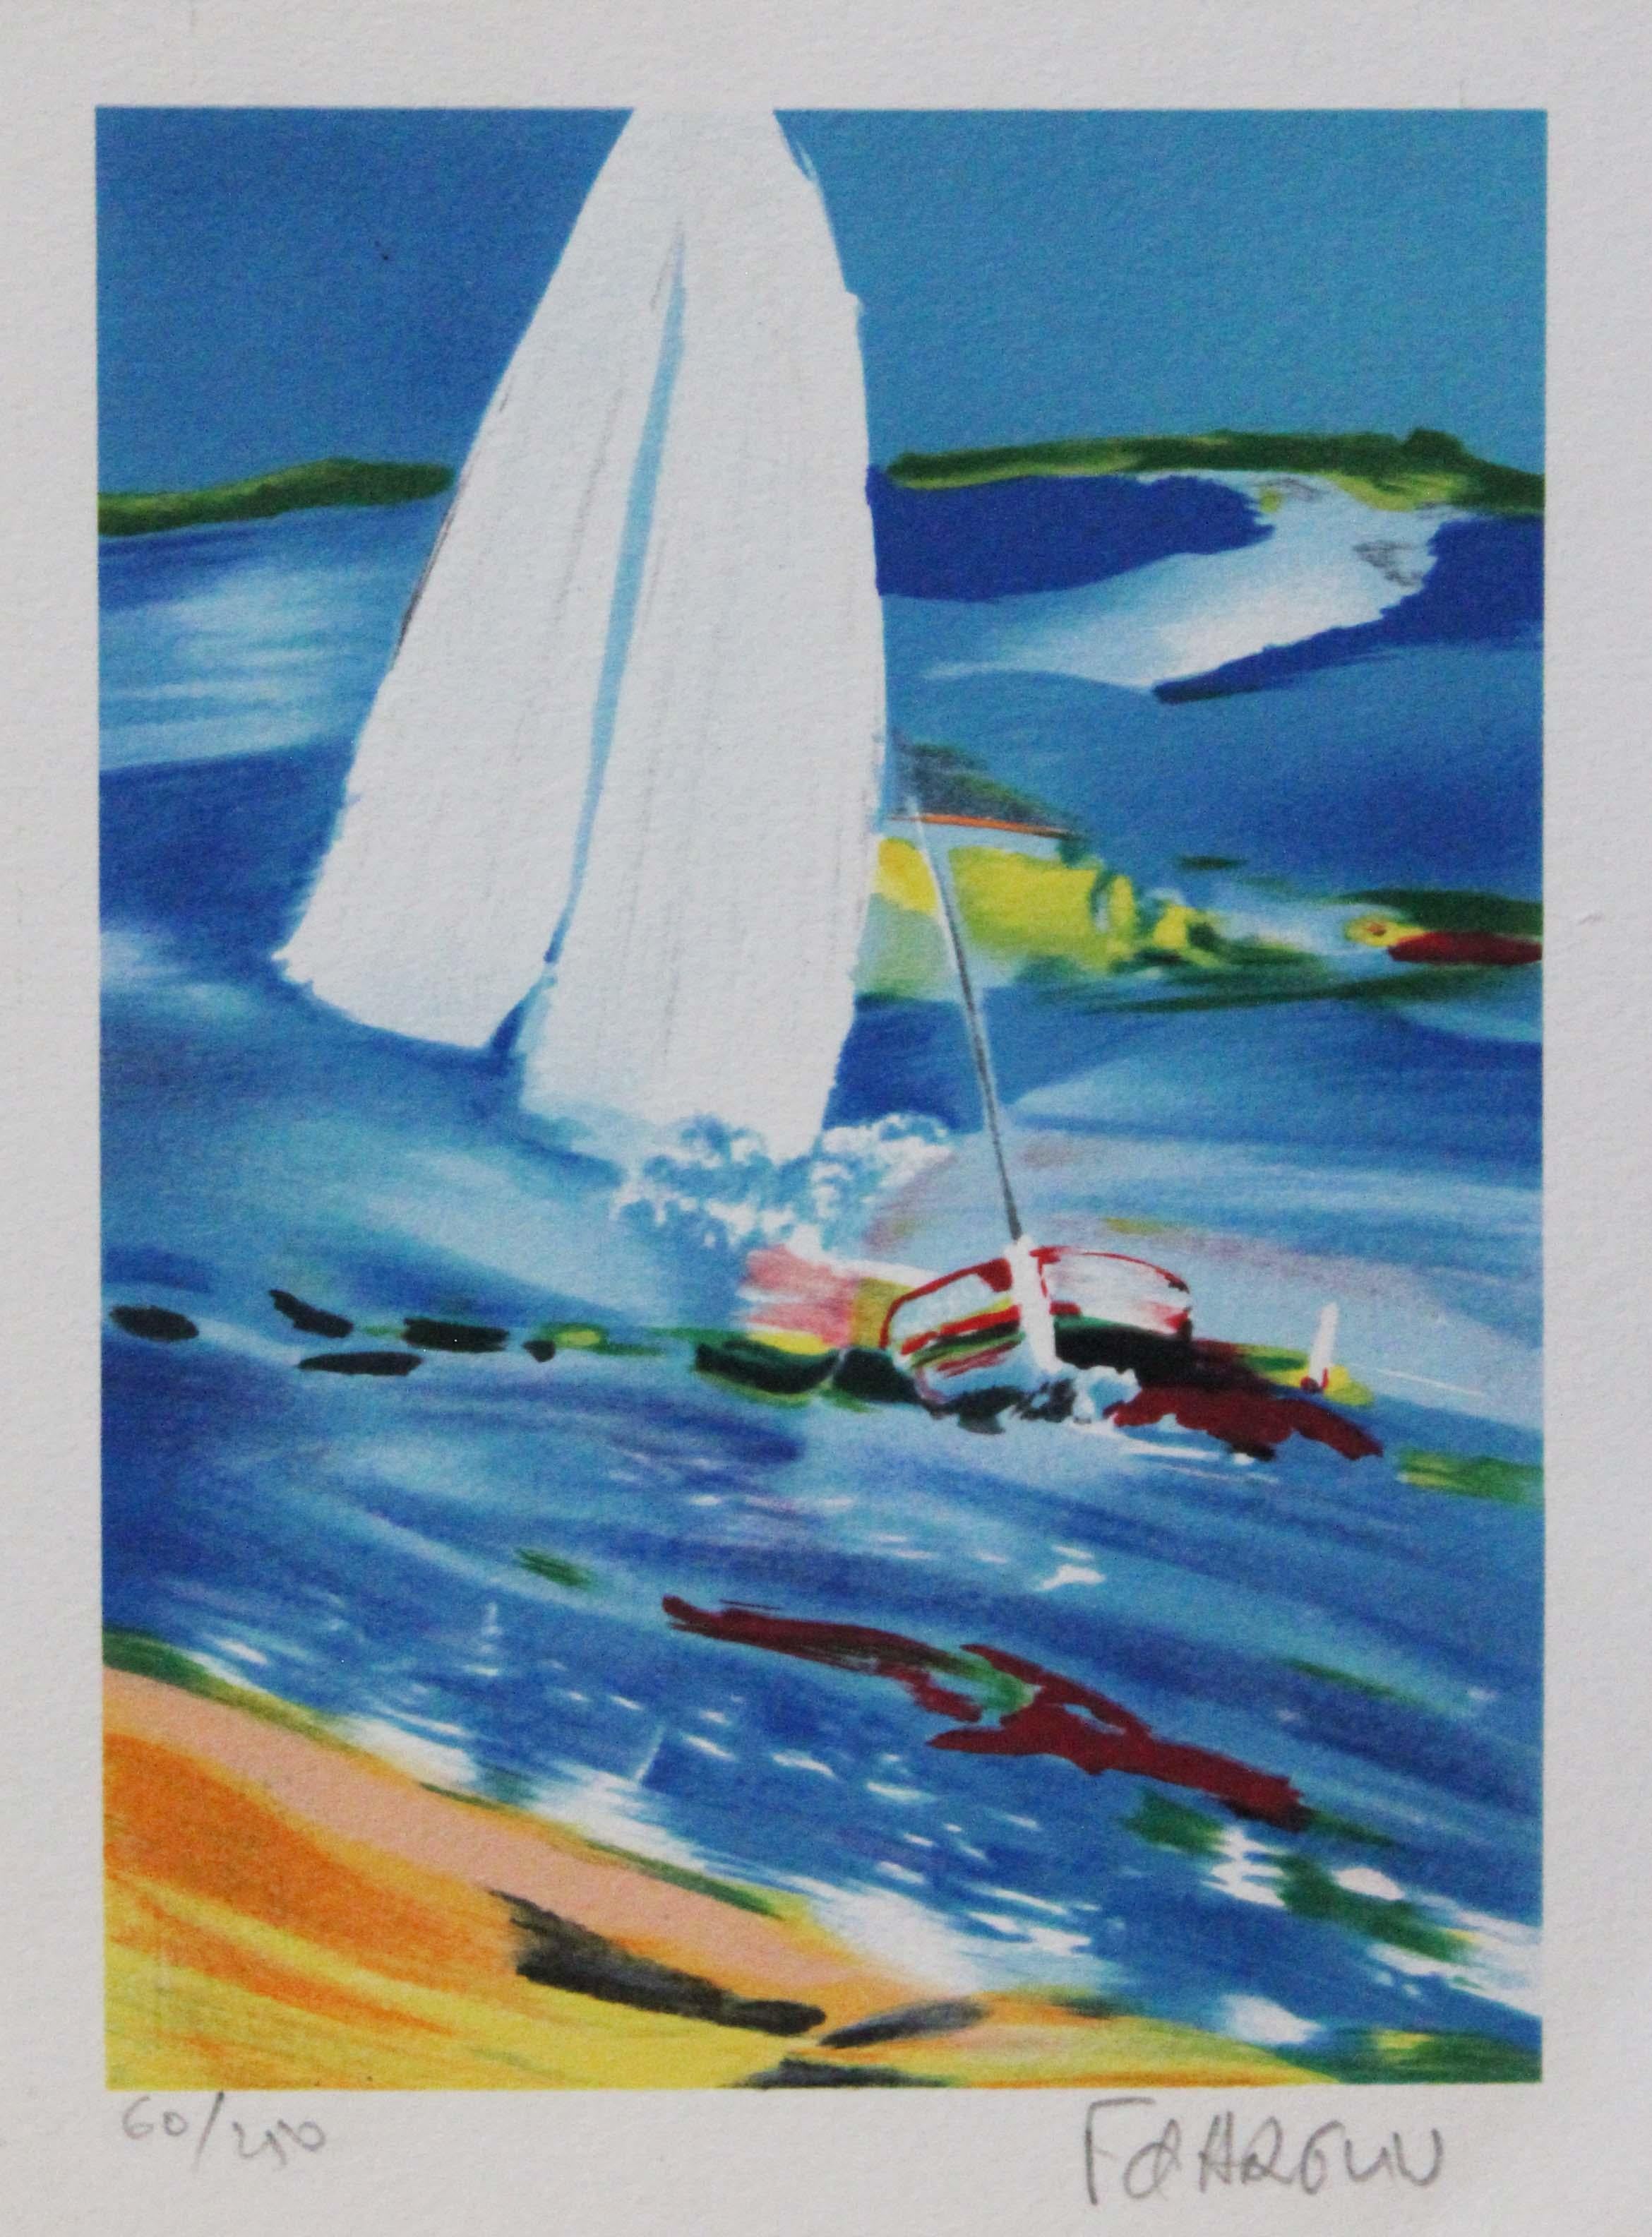 Francois D’Arguin Landscape Print - "Title Unknown" Nautical-themed Limited Edition Print. Pencil-signed by Artist